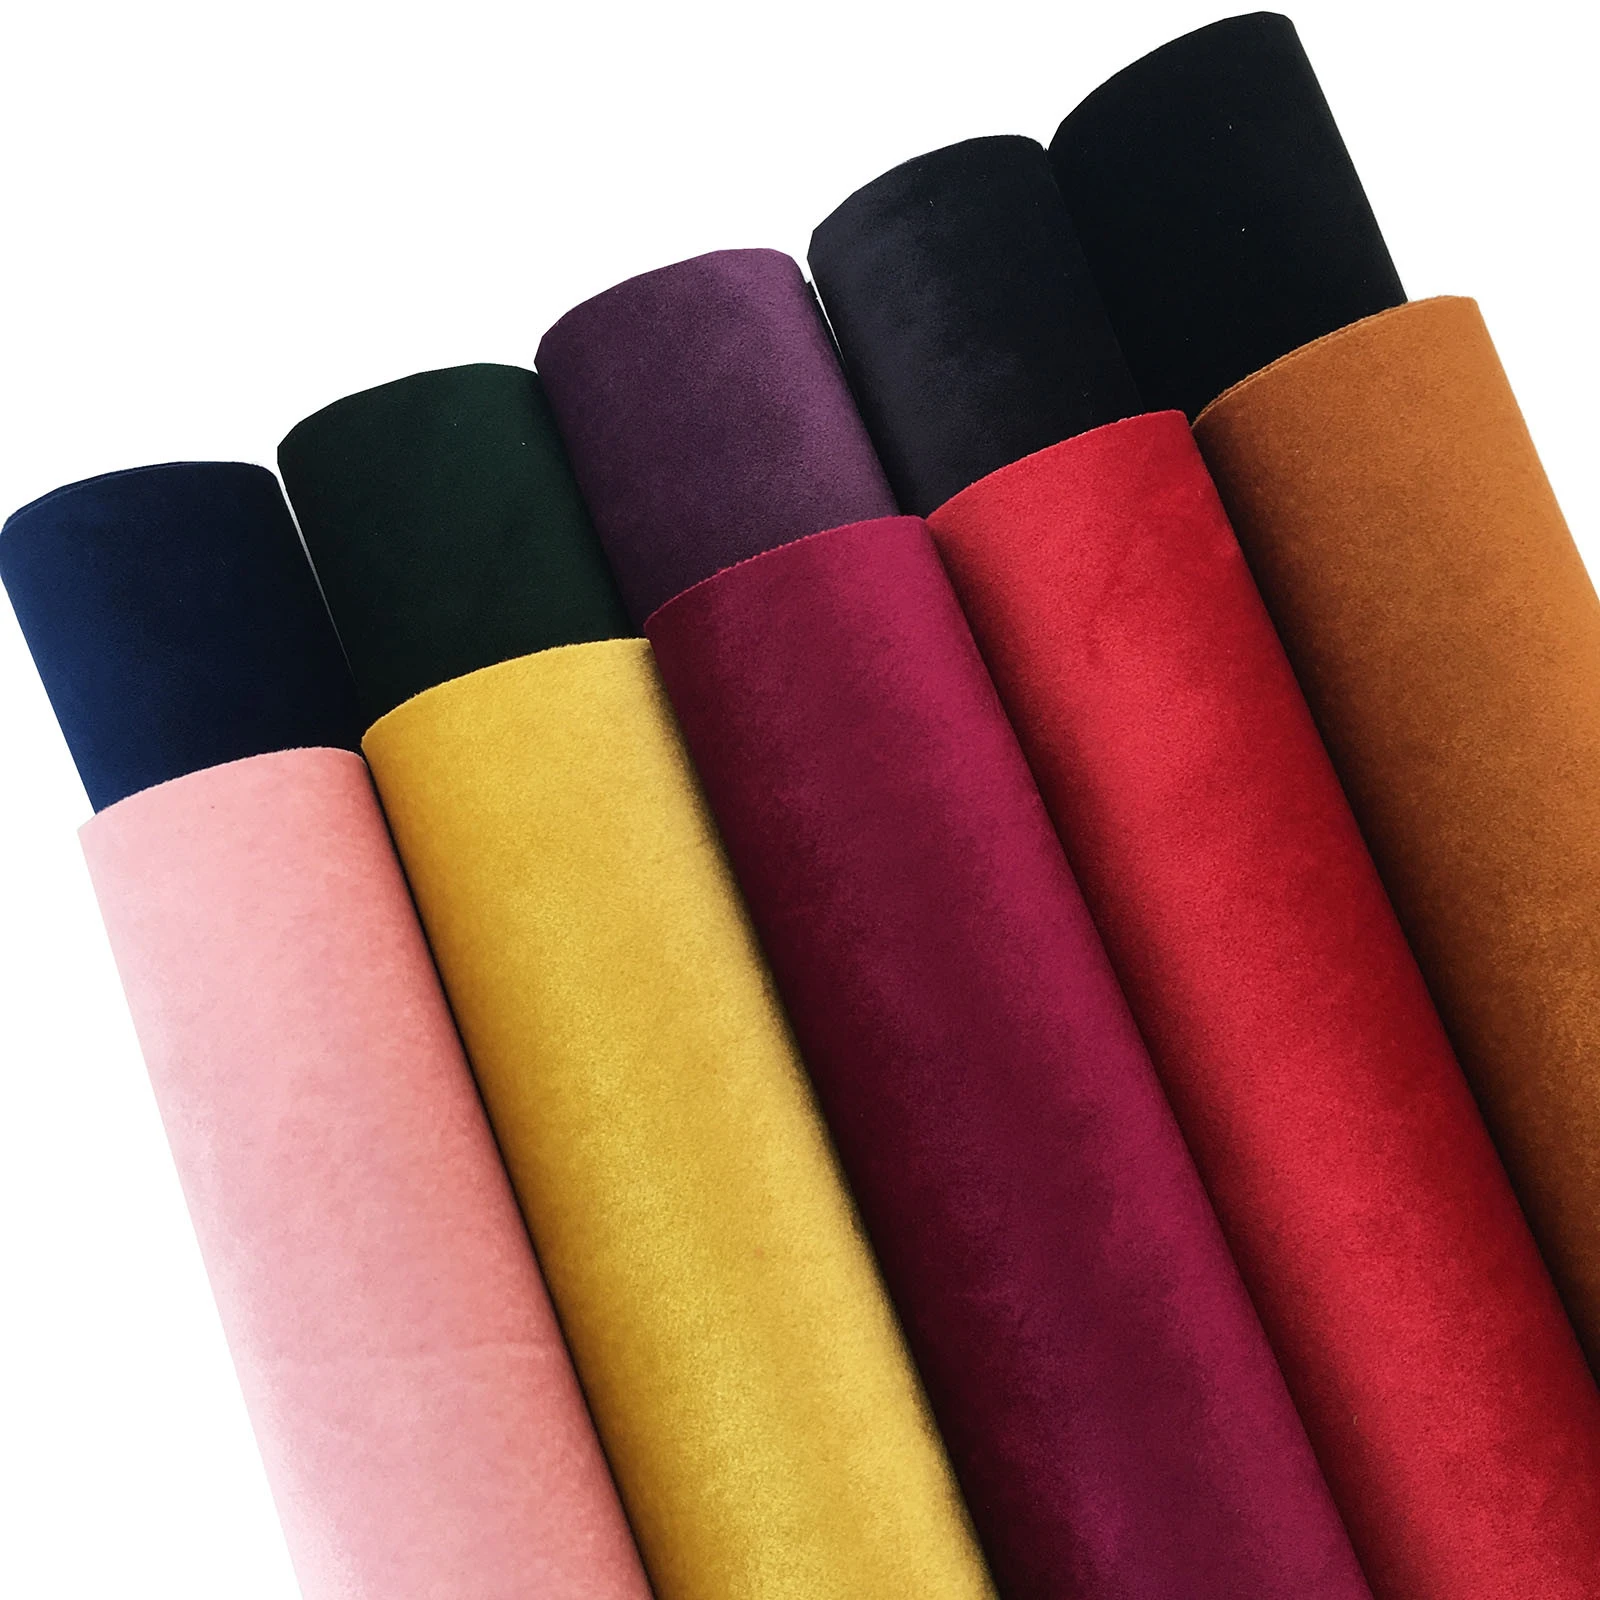 A4 Luxury Soft Velvet Faux Leather Fabric Faux Leather Sheets Synthetic Leatherette for DIY Bows Bags Shoes Accessories